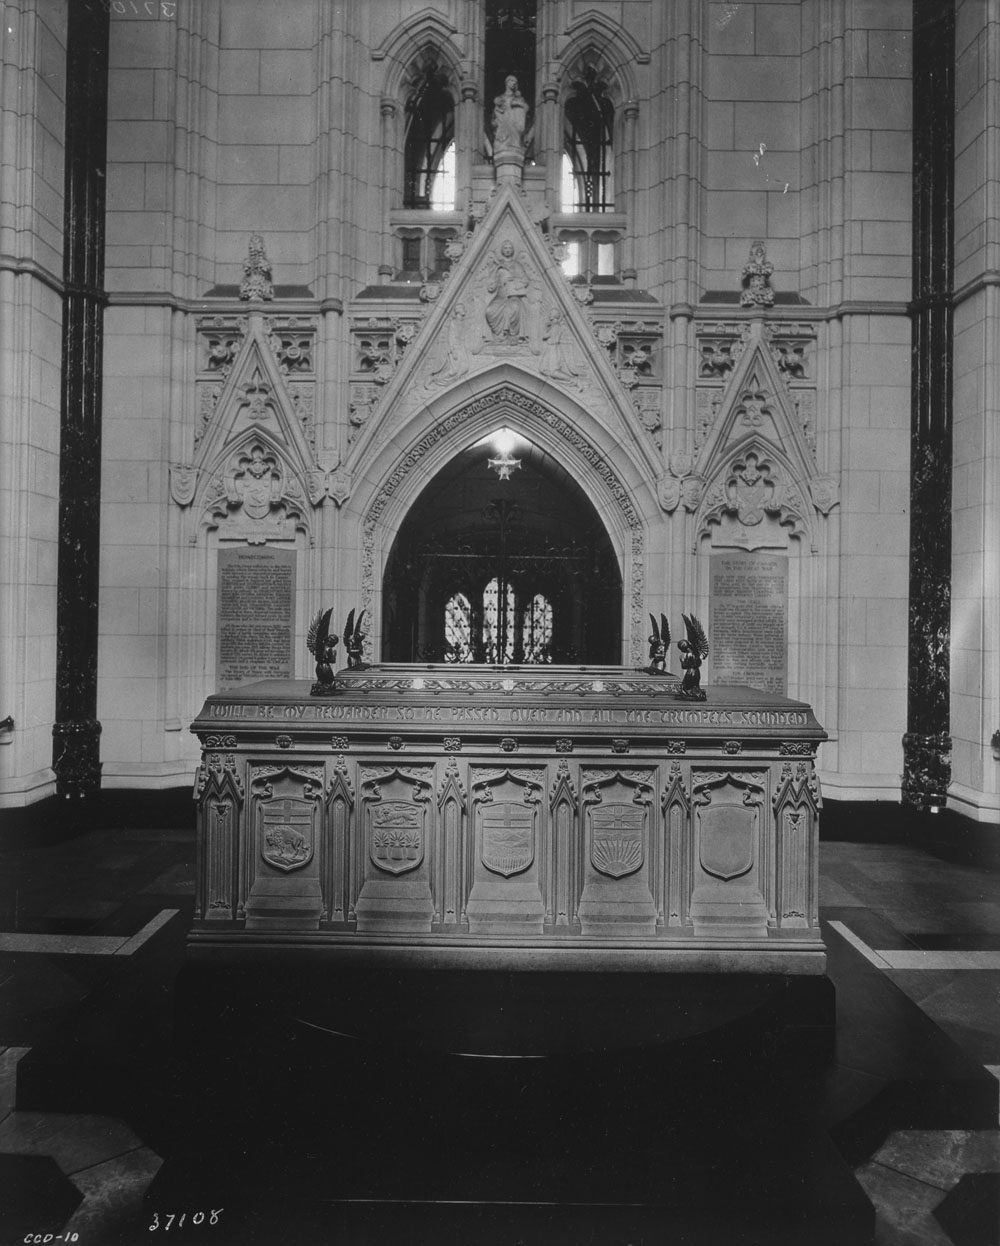 Inside Memorial Chamber 1932, (view from entrance).